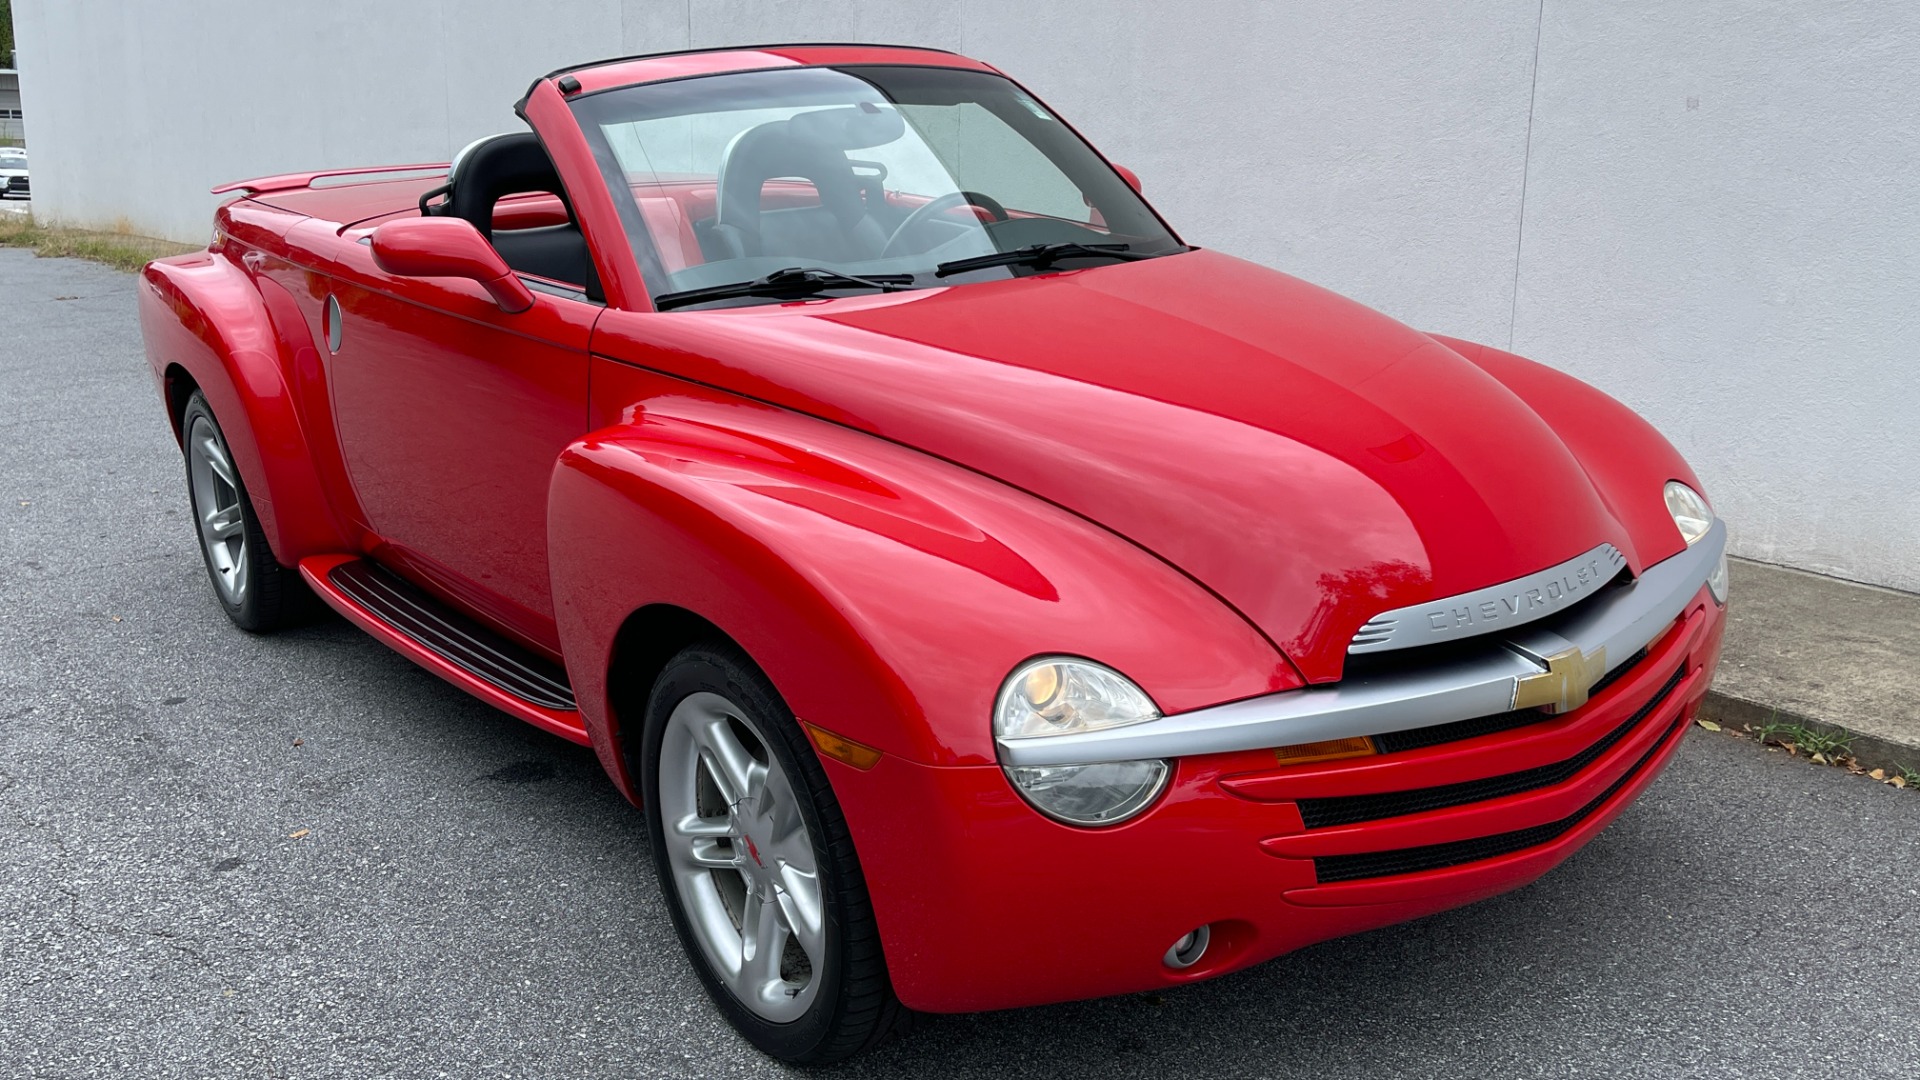 Used 2004 Chevrolet SSR LS / CONVERTIBLE / 5.3L V8 / LEATHER / HEATED SEATS / BACKUP CAMERA for sale $19,995 at Formula Imports in Charlotte NC 28227 8